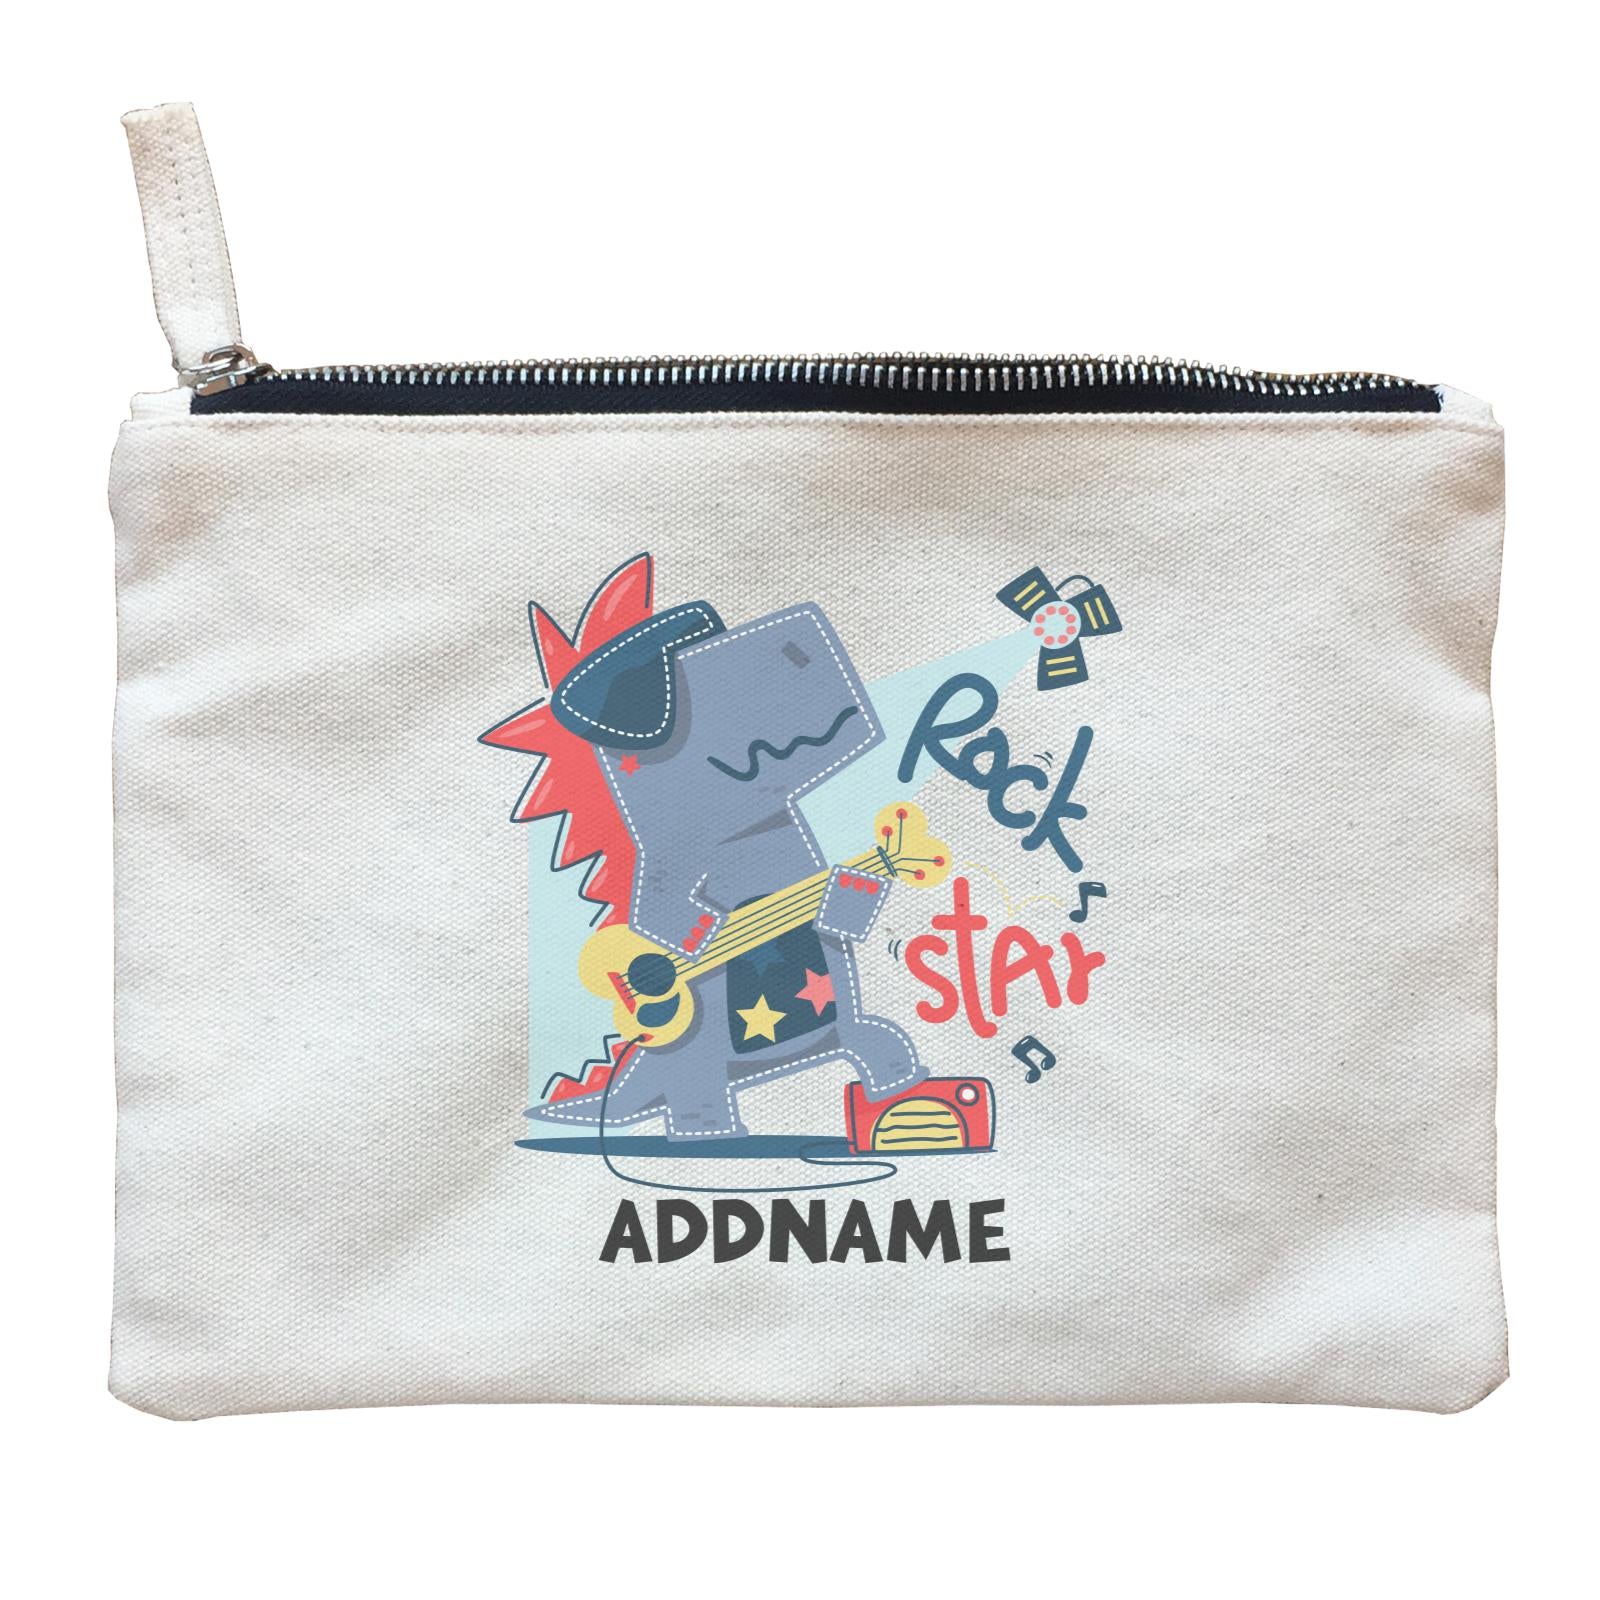 Rock Star Dinosaur with Guitar Addname Bag Zipper Pouch